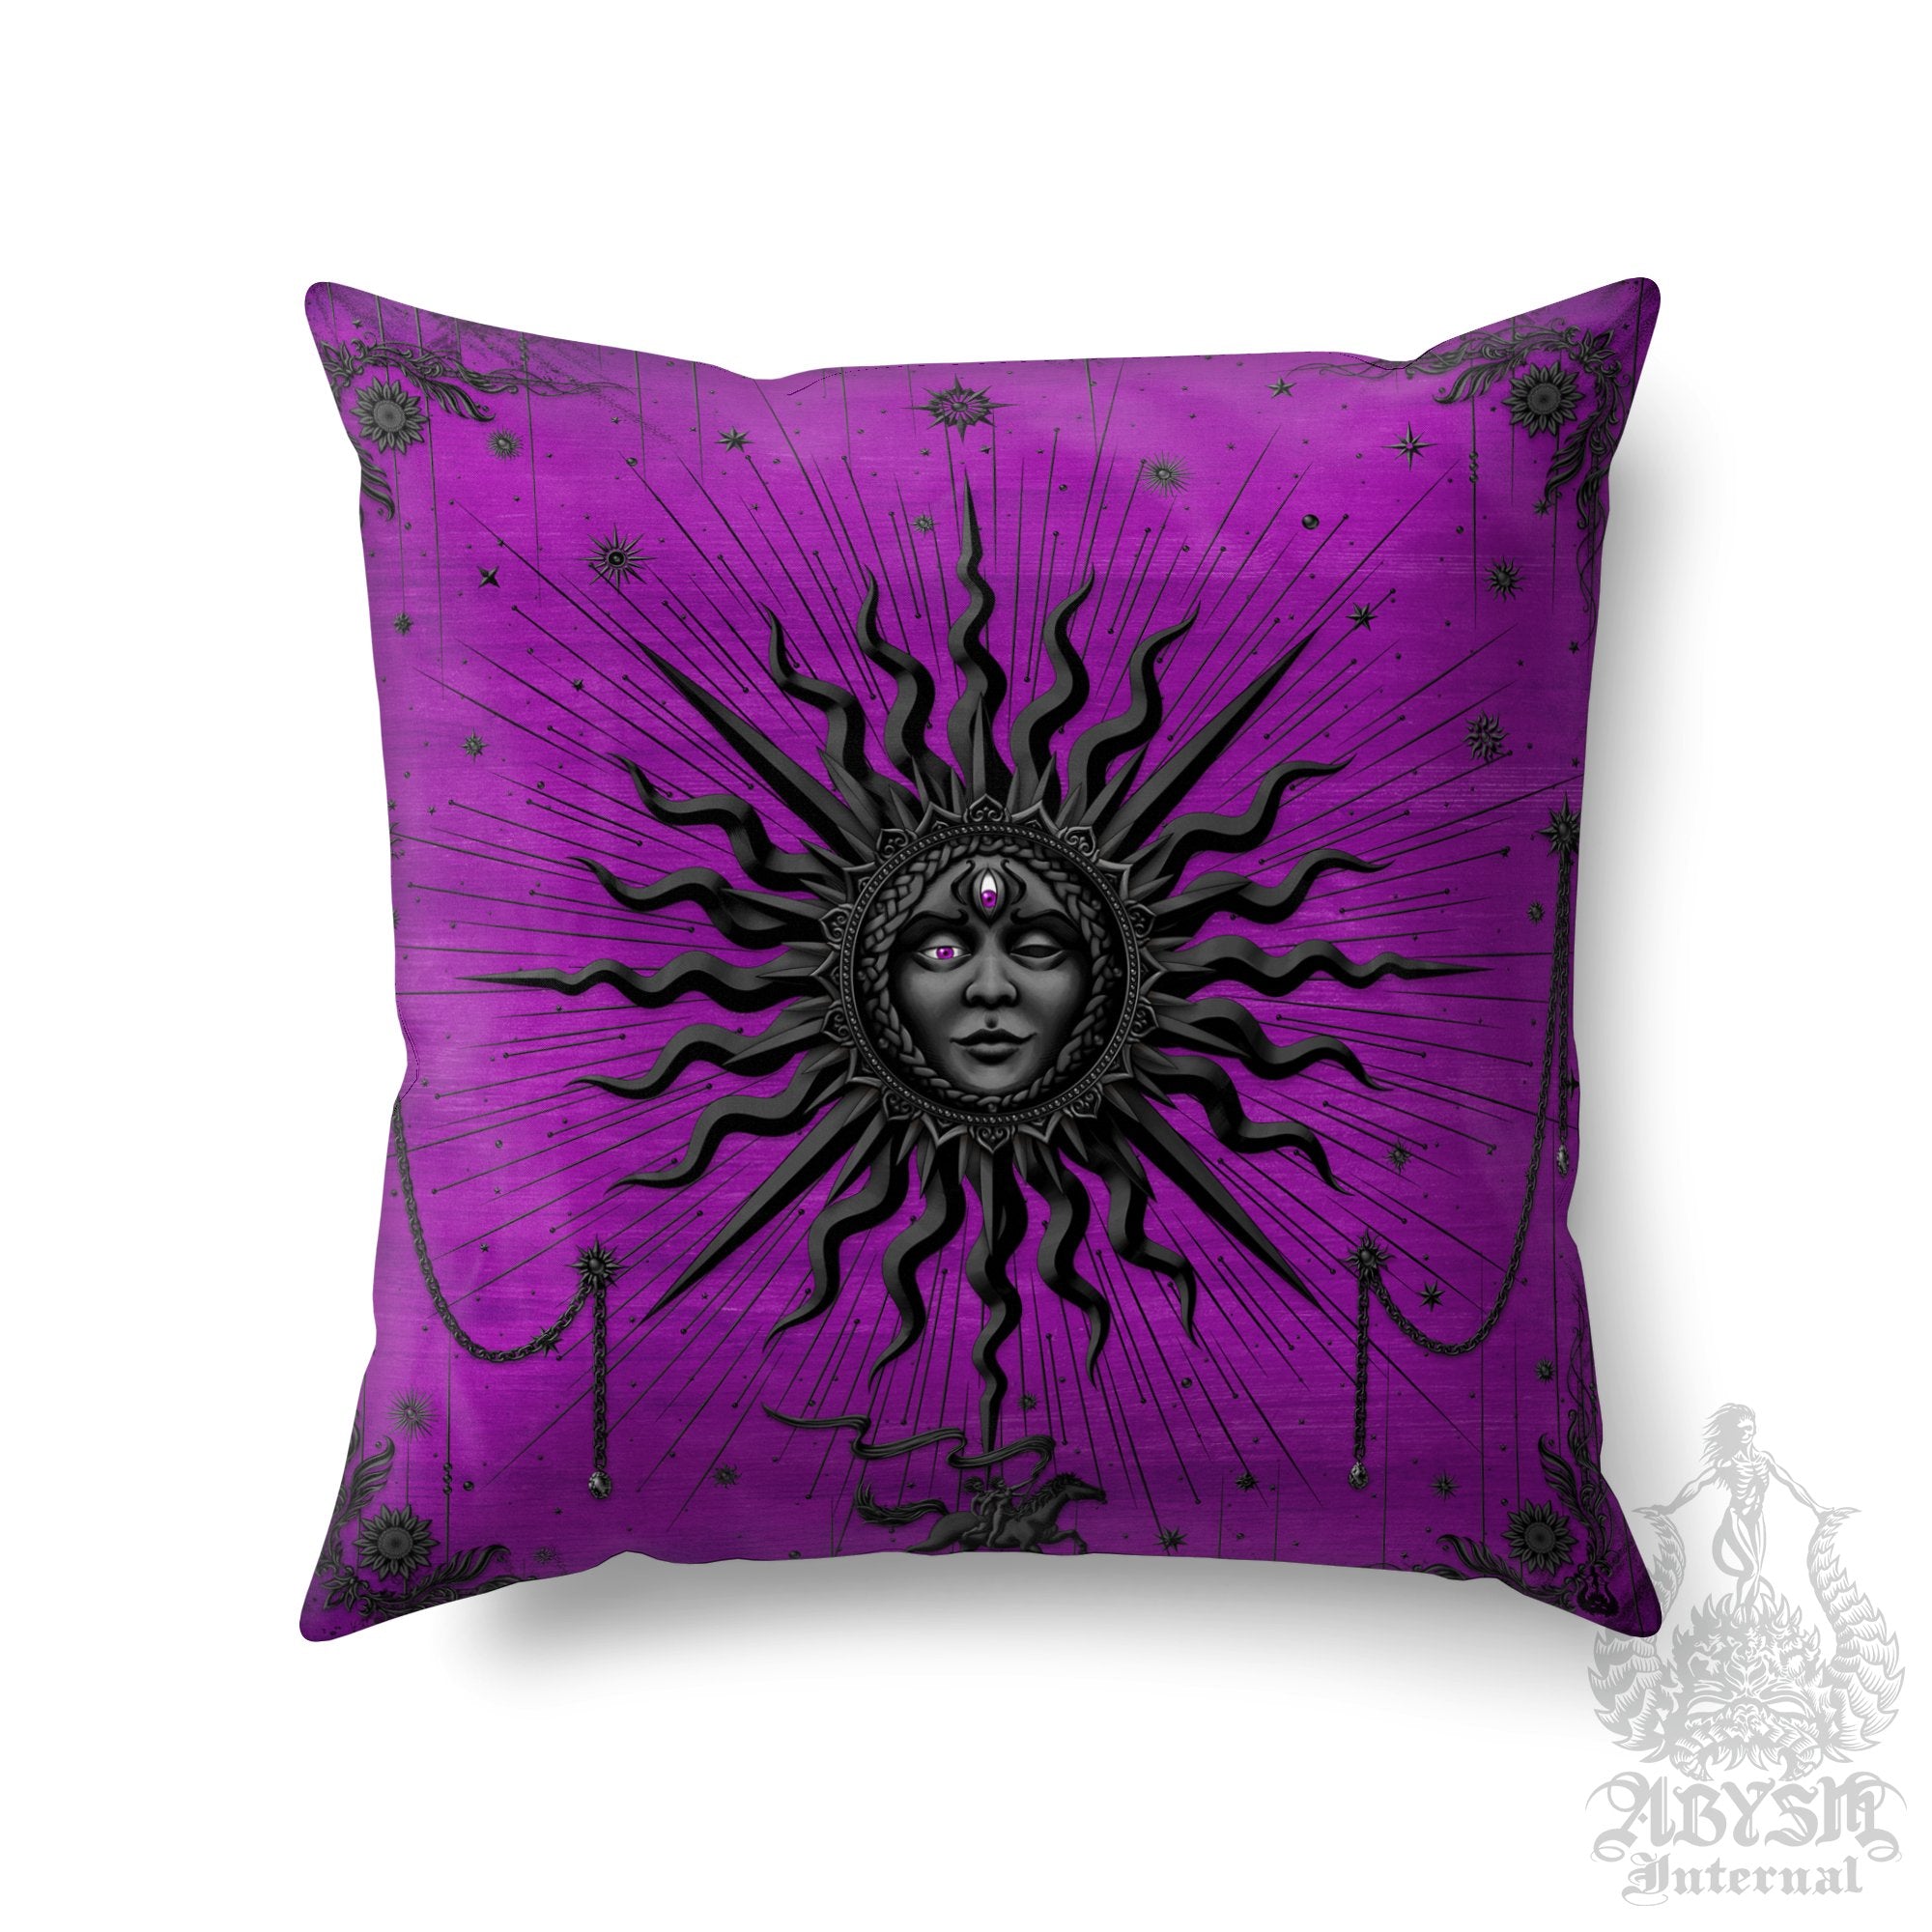 Pastel Goth Throw Pillow, Witchy Decorative Accent Pillow, Witch Square Cushion Cover, Black Sun, Arcana Tarot Art, Whimsigoth Home, Fortune & Magic Room Decor - Purple - Abysm Internal